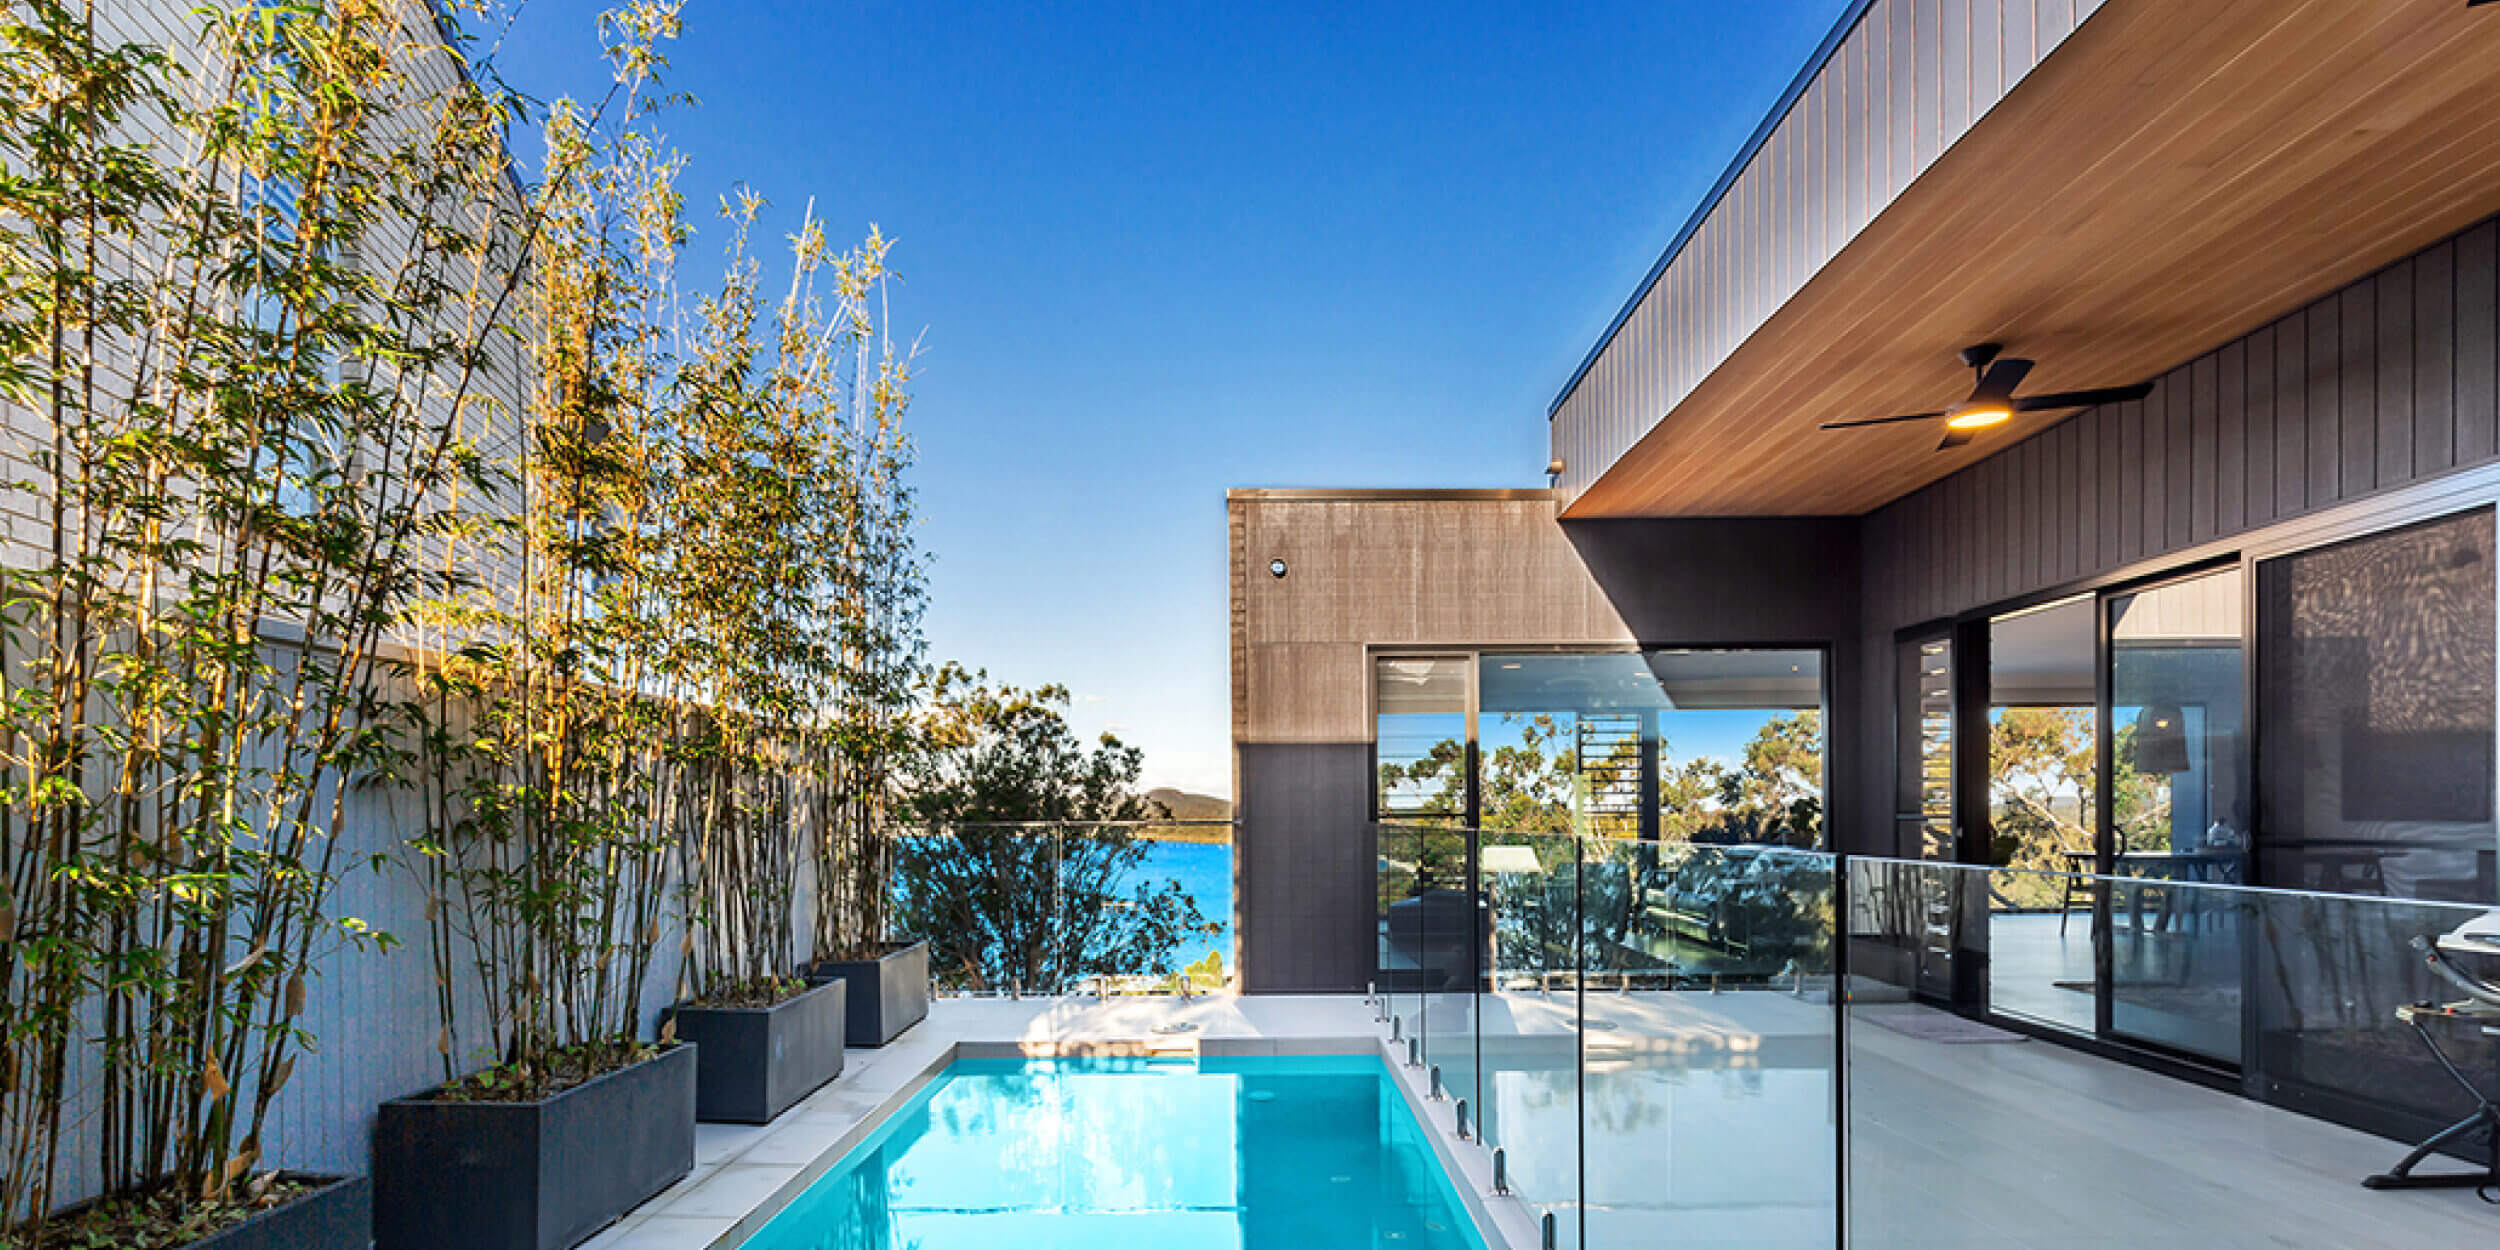 An outdoor area featuring a narrow swimming pool with clear blue water, surrounded by glass fencing. Adjacent is a modern house with dark wood panels and large sliding glass doors, located in Port Stephens. L